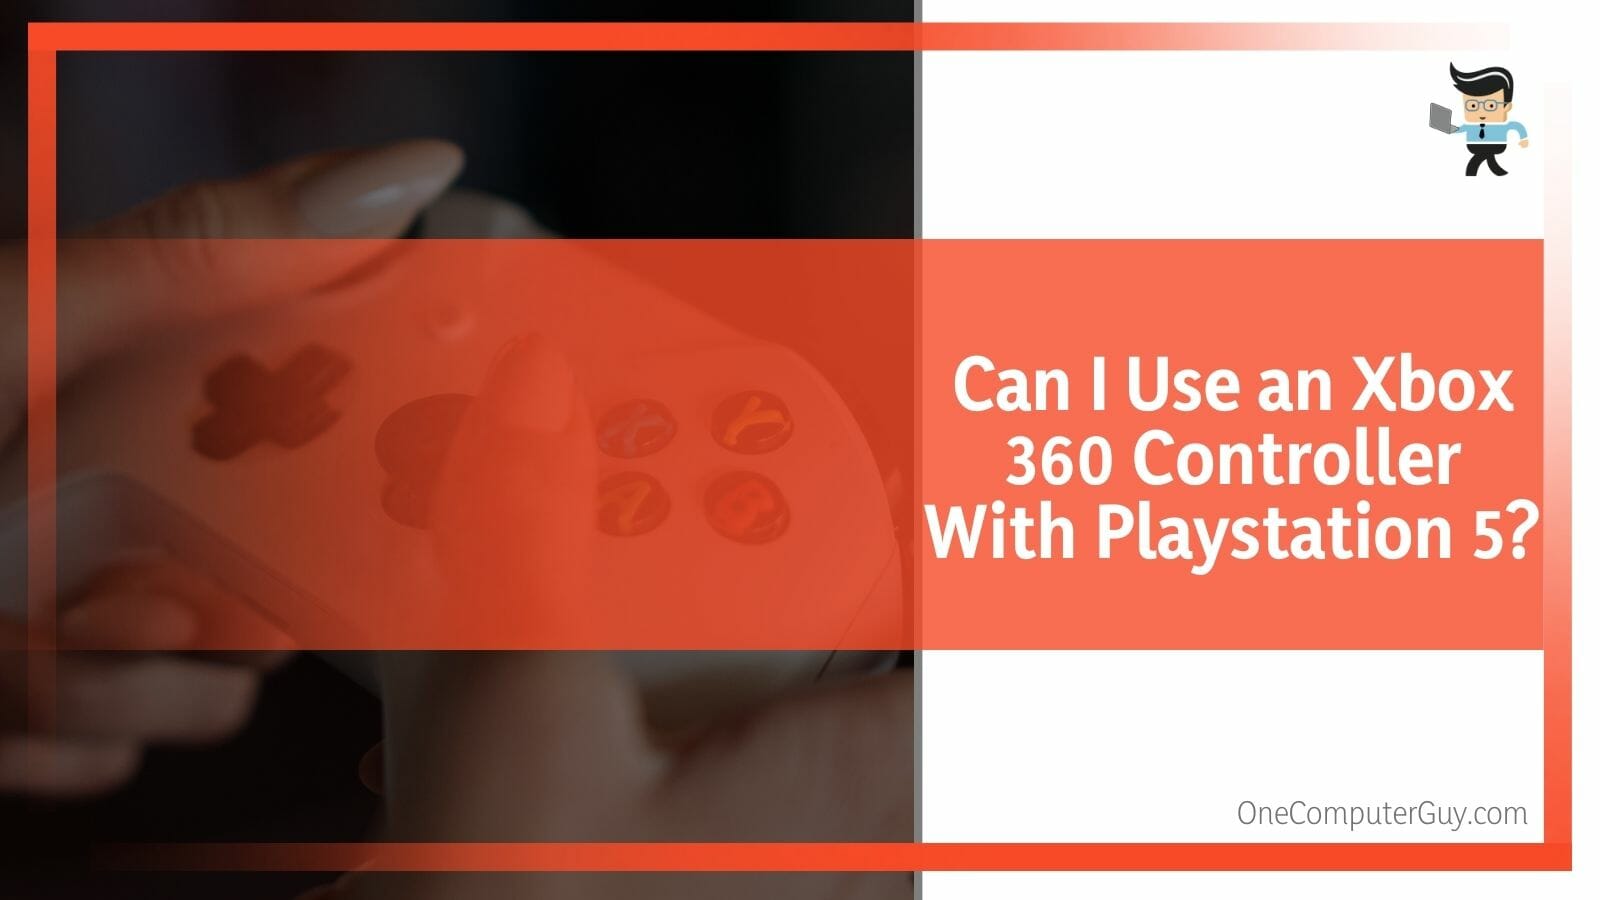 Can I Use an Xbox 360 Controller With Playstation 5